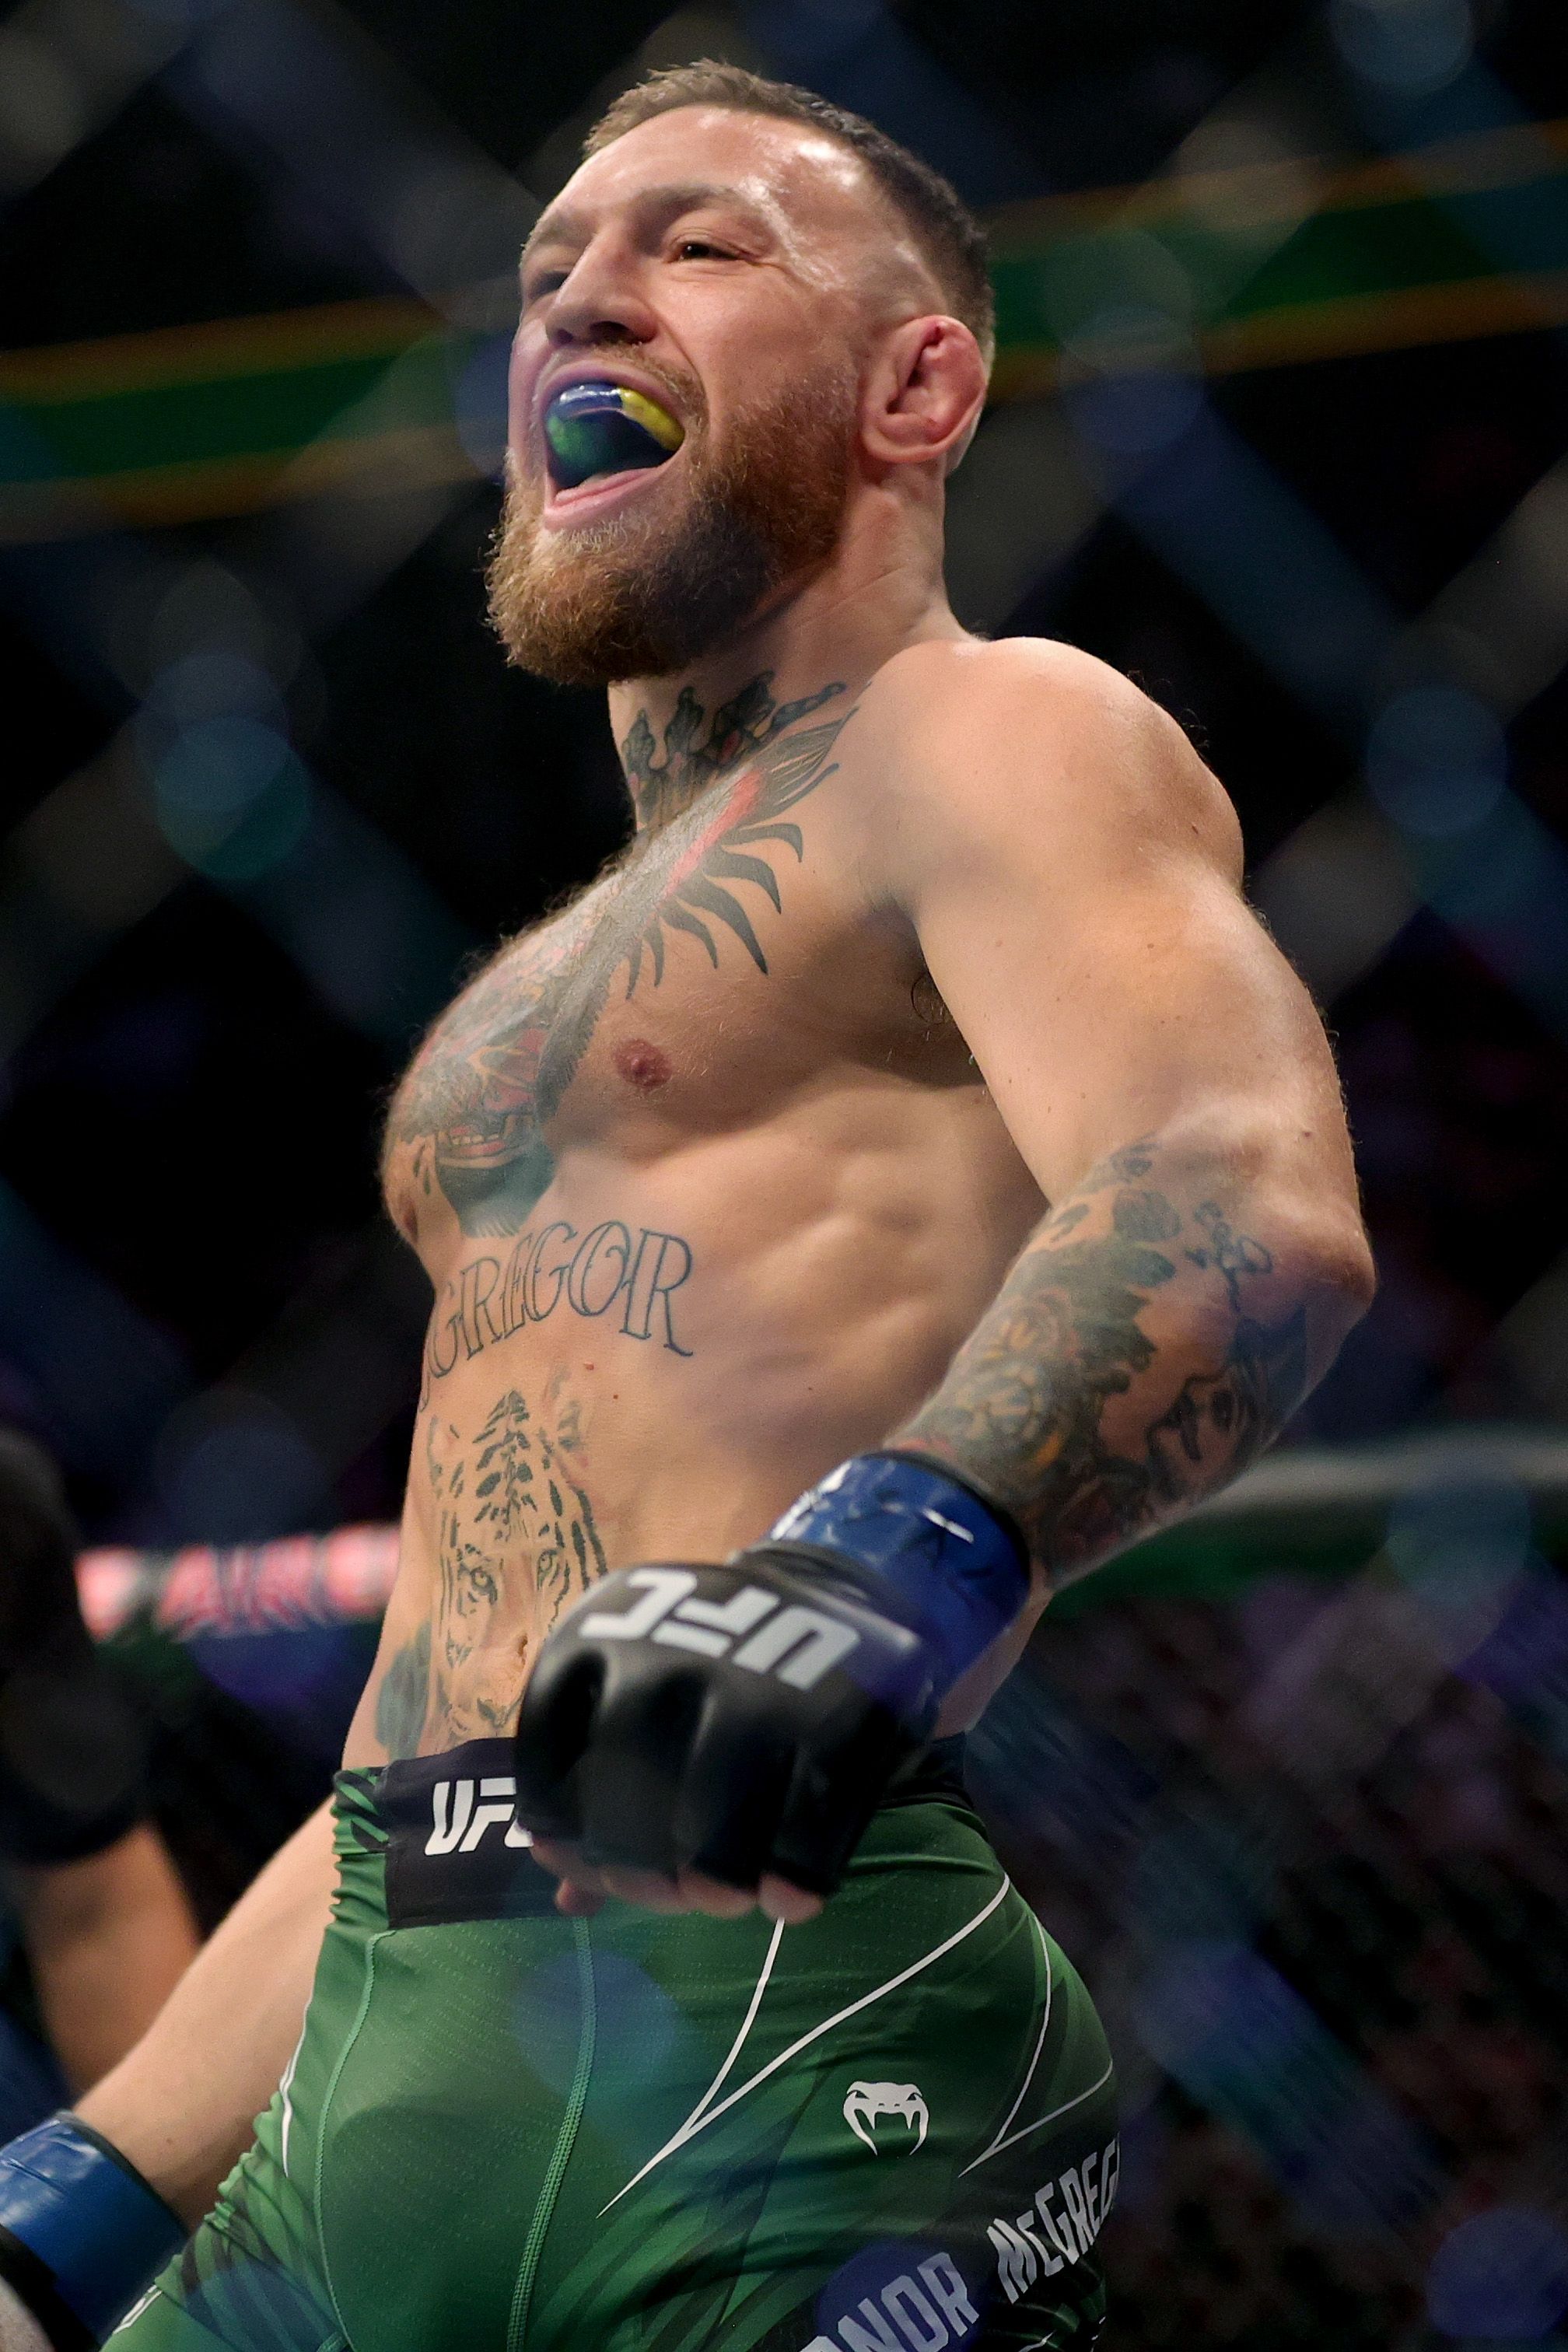 Conor McGregor weight: How much does UFC legend currently weigh?